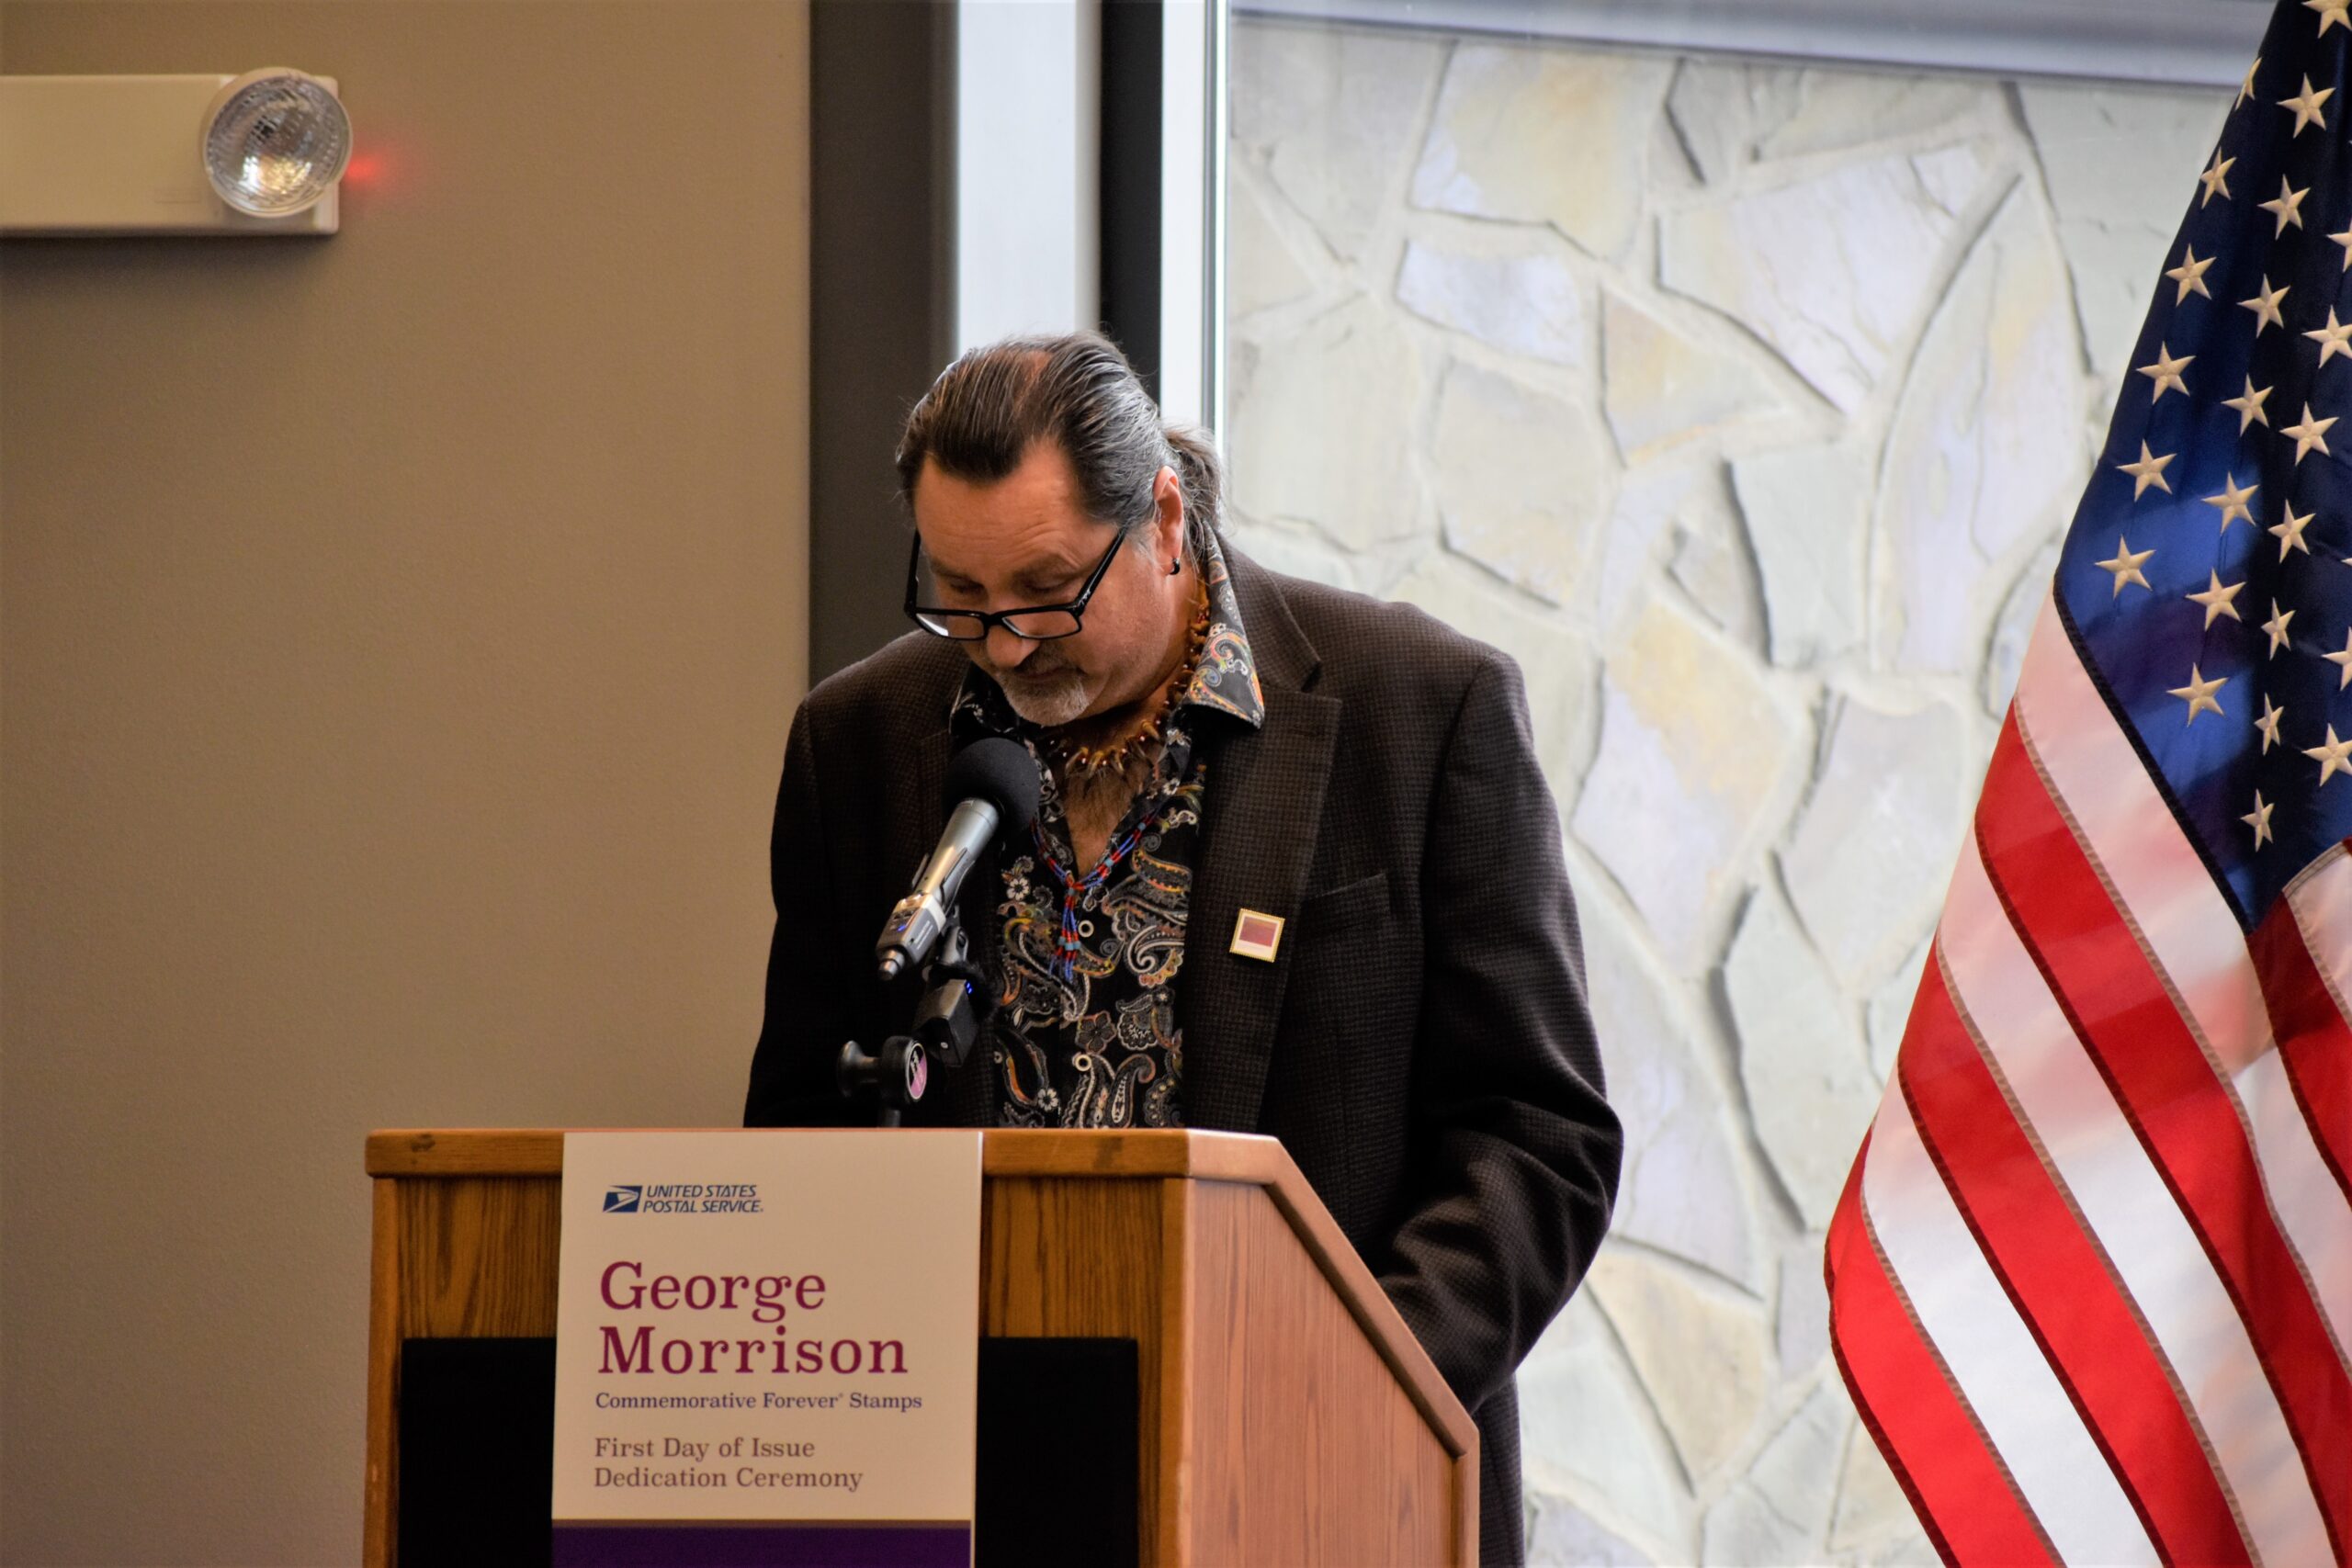 Community remembers George Morrison at Forever Stamp dedication